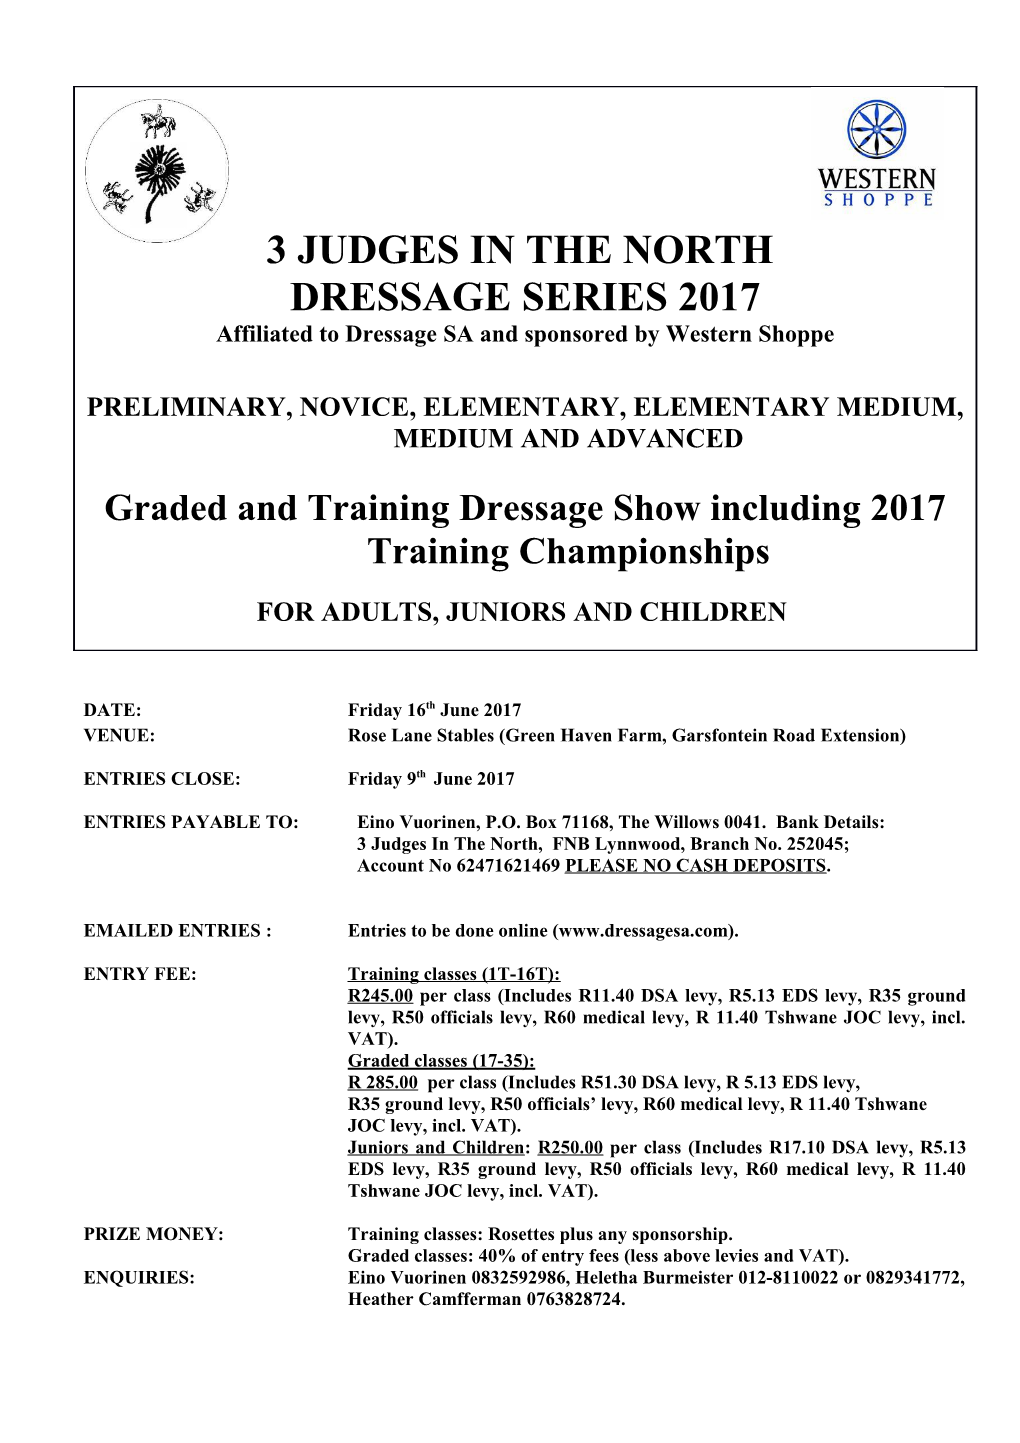 Graded and Training Dressage Show Including 2017 Training Championships